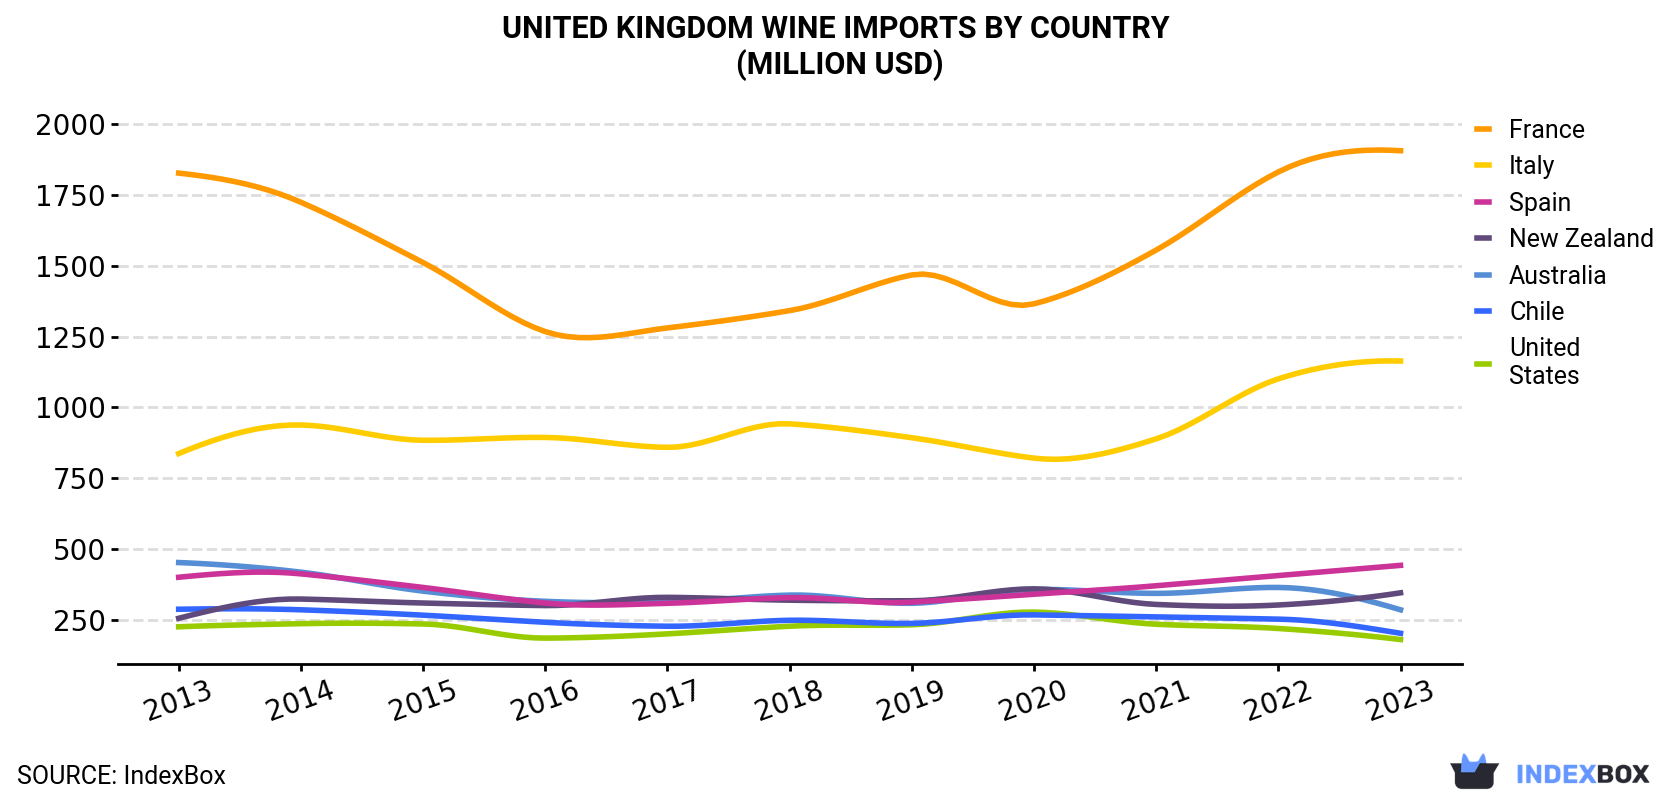 United Kingdom Wine Imports By Country (Million USD)